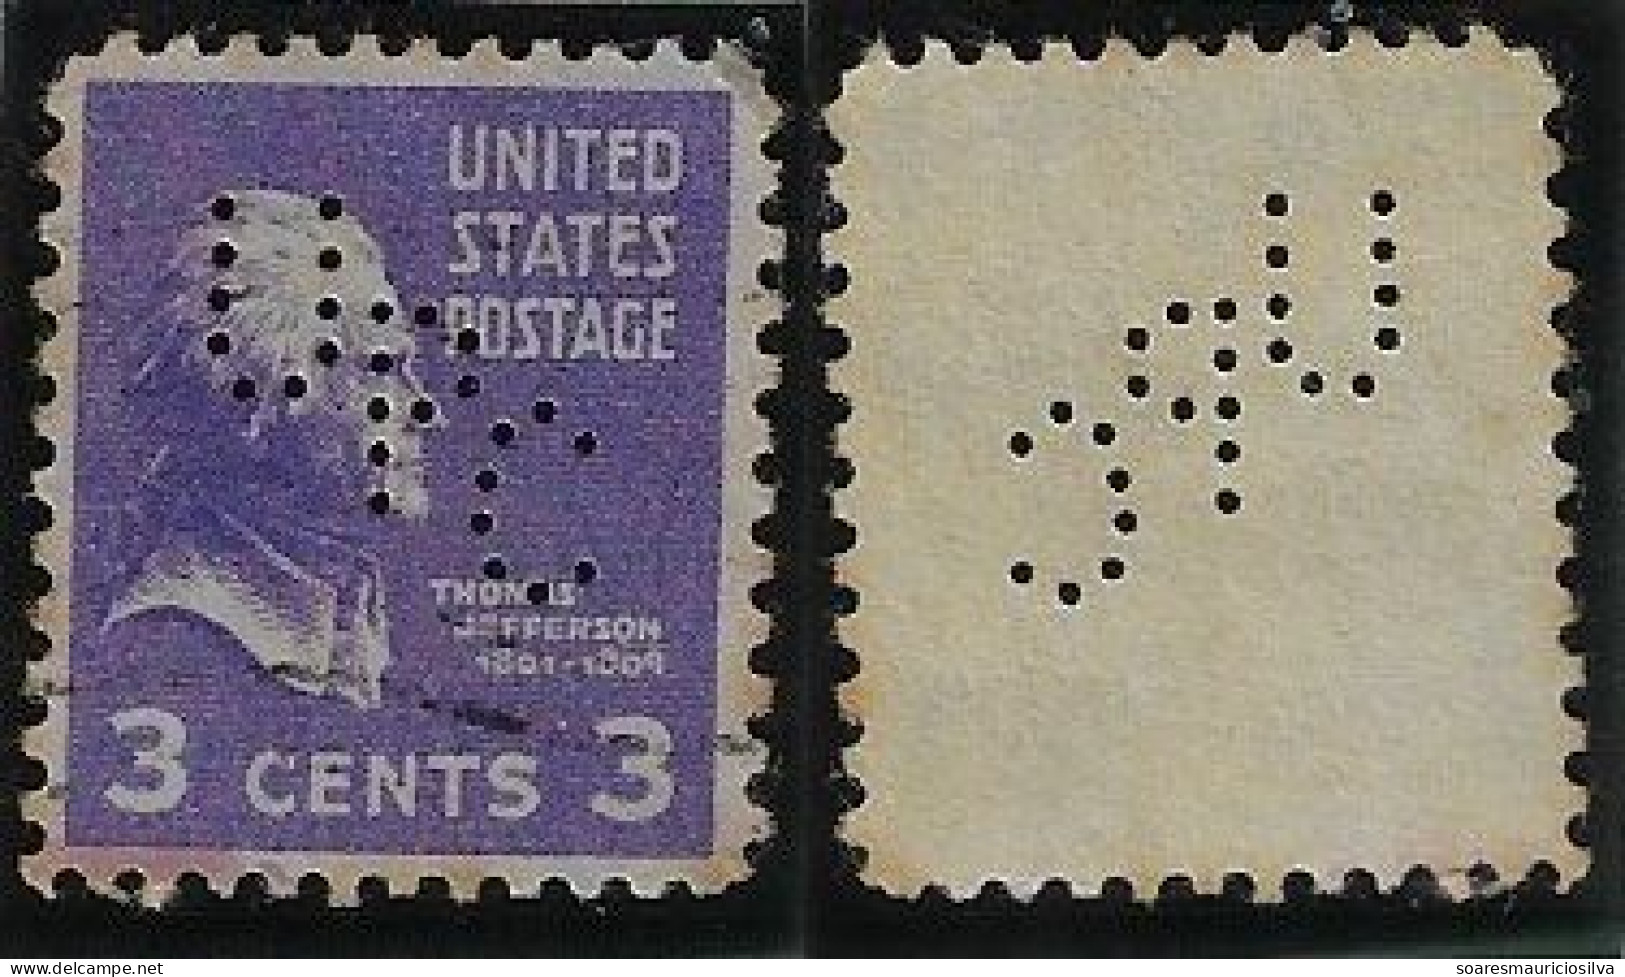 USA United States 1931/1954 Stamp With Perfin UPC By The Union Pacific Coal Company From Rock Springs Lochung Perfore - Zähnungen (Perfins)